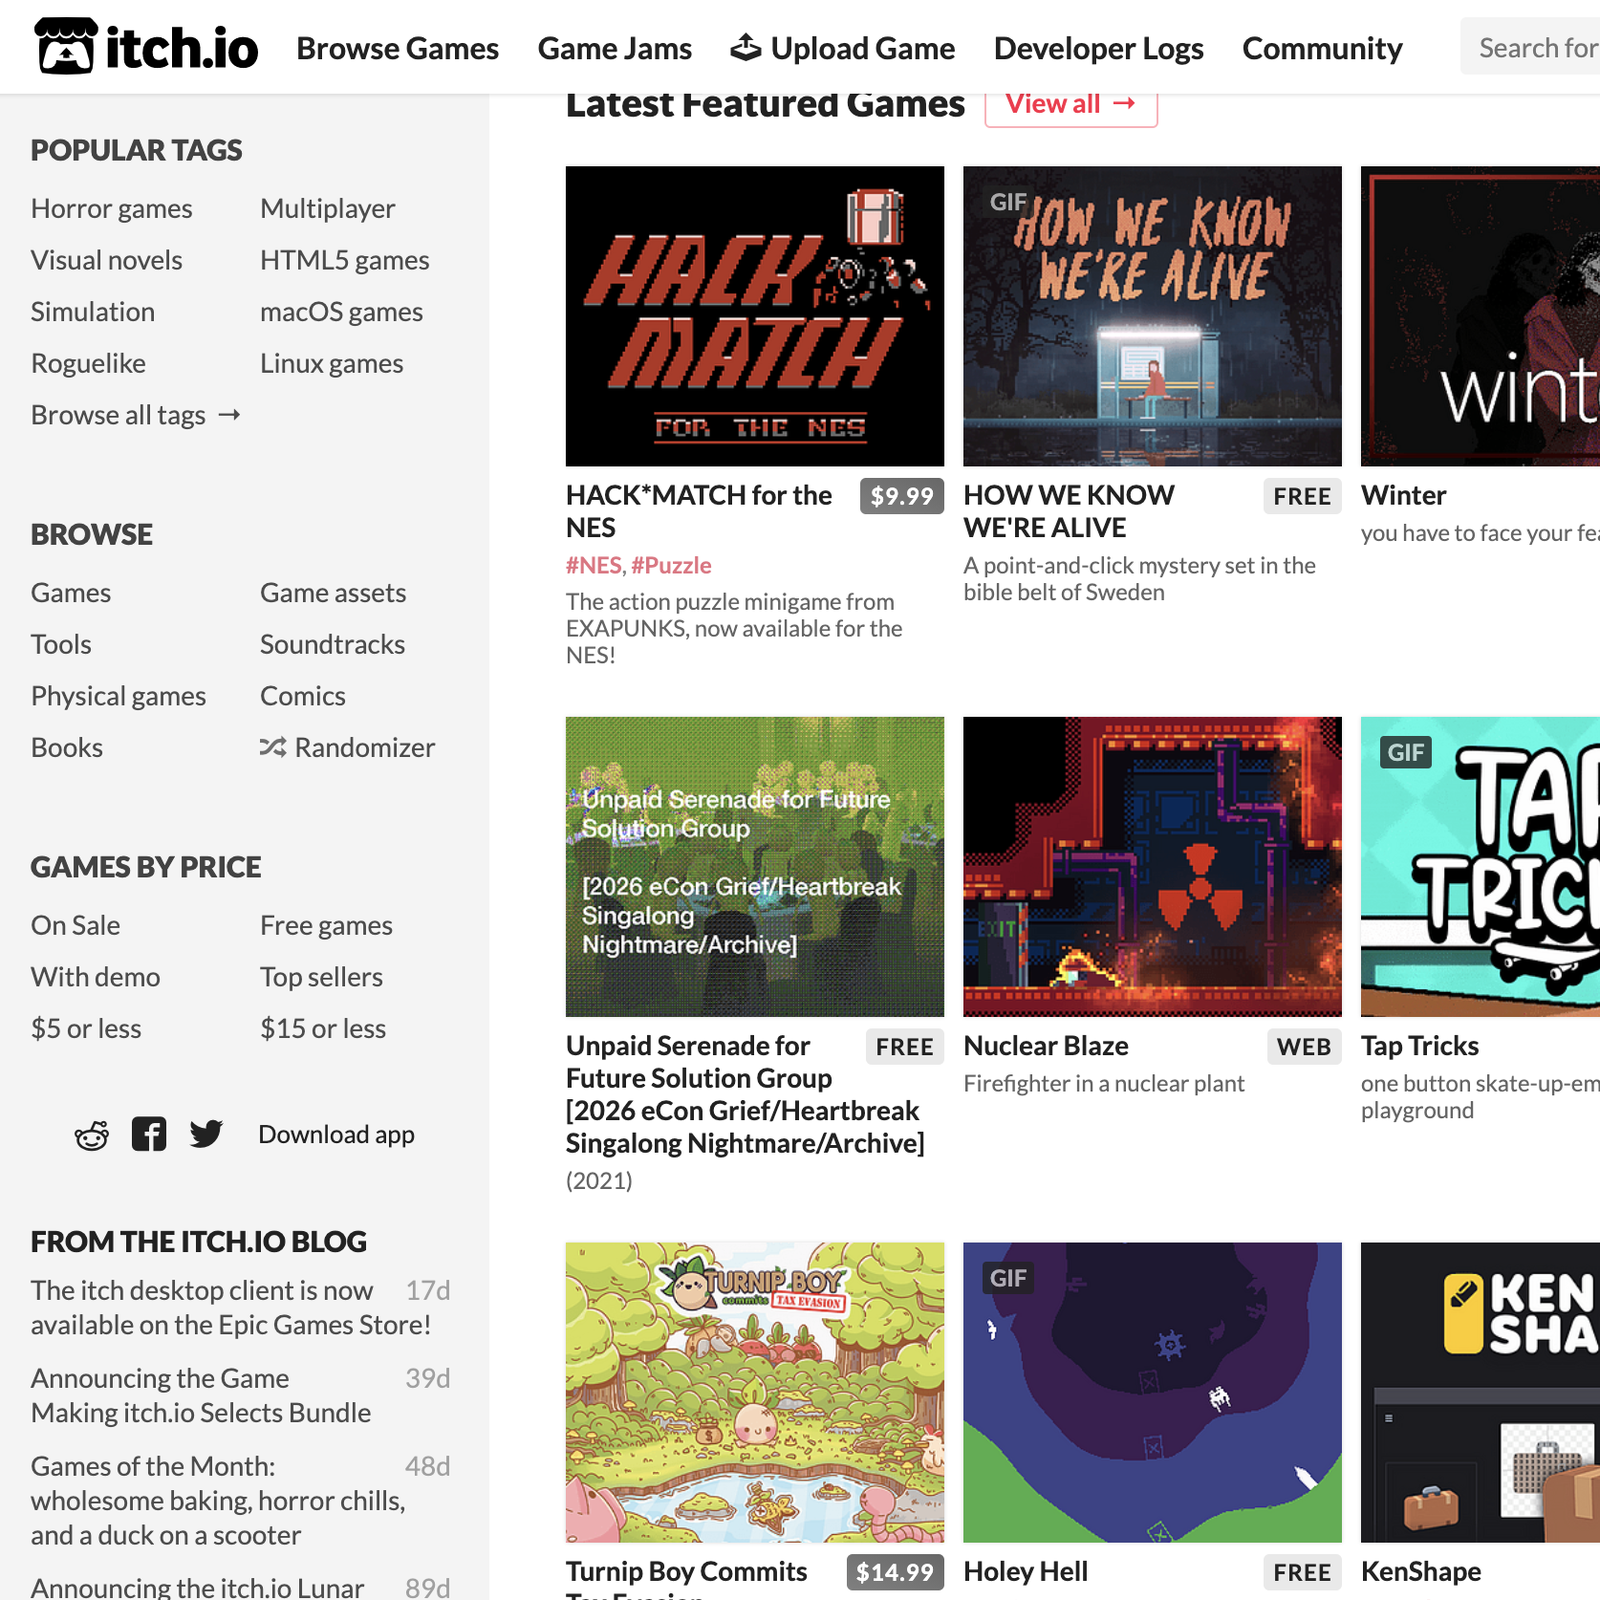 Hundreds of free games on Itch.io due to Coronavirus - Indie Game